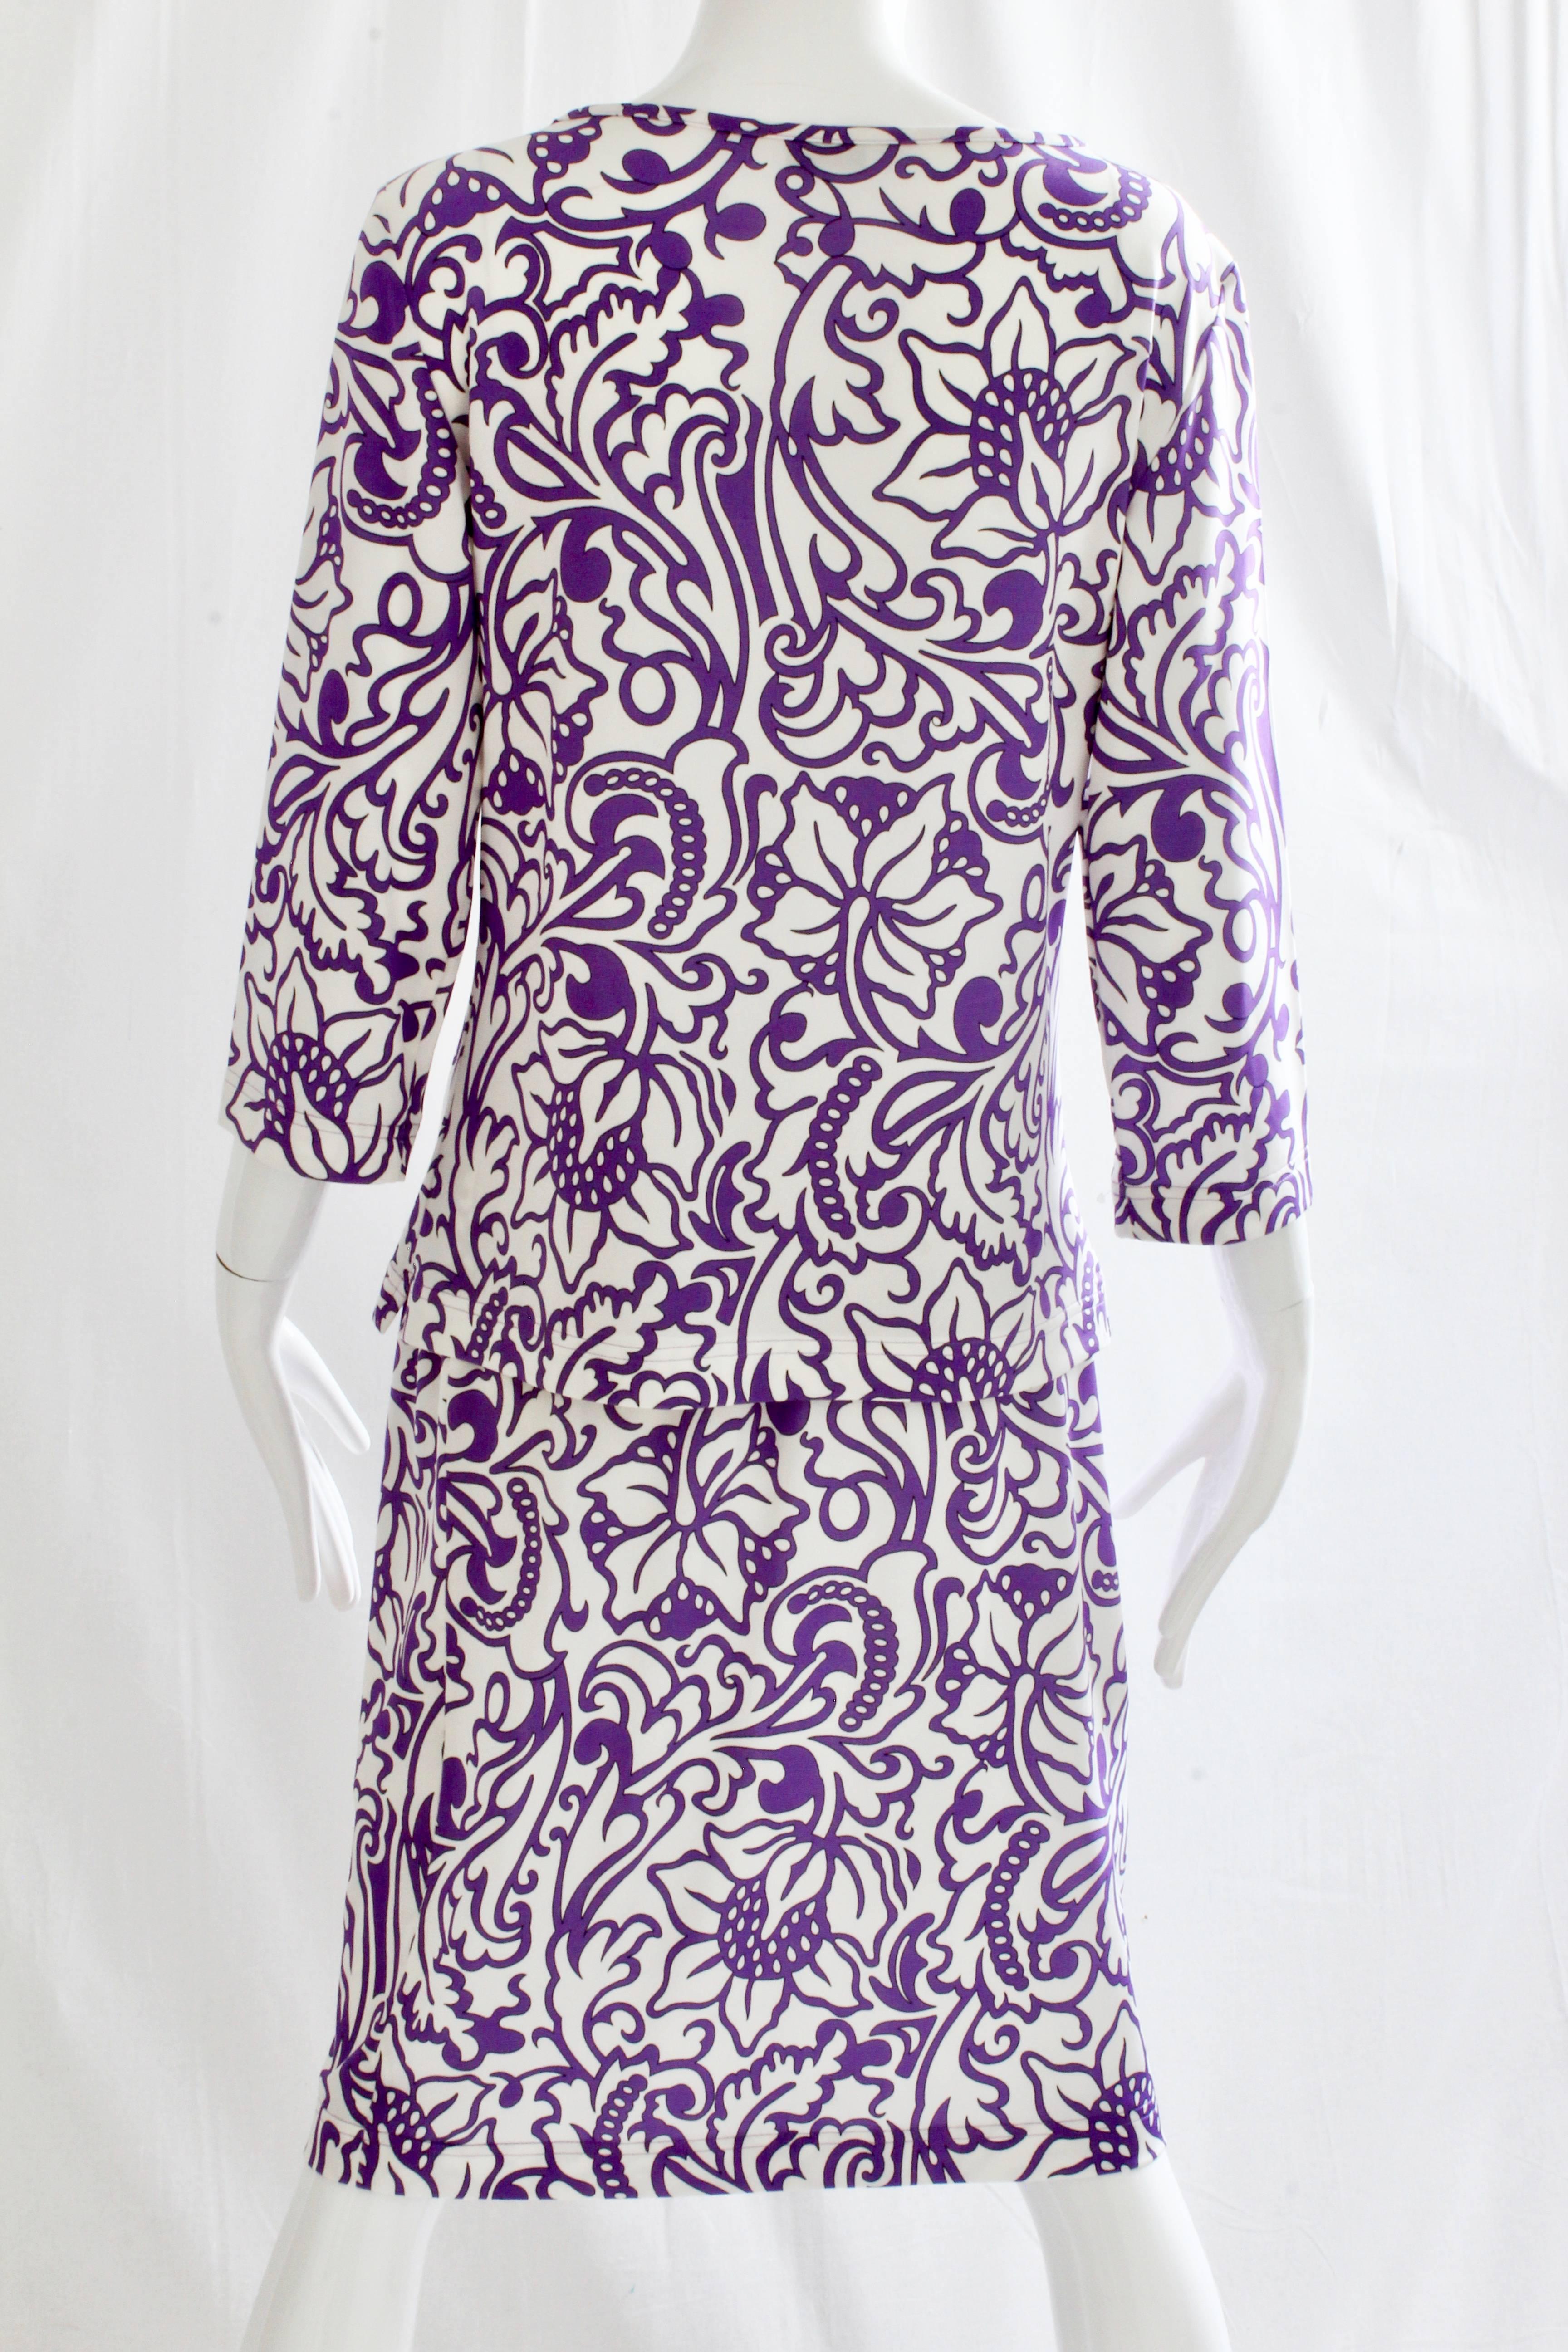 Averardo Bessi Blouse & Skirt Suit 2pc Purple White Floral Abstract Italy 12/10 In Good Condition In Port Saint Lucie, FL